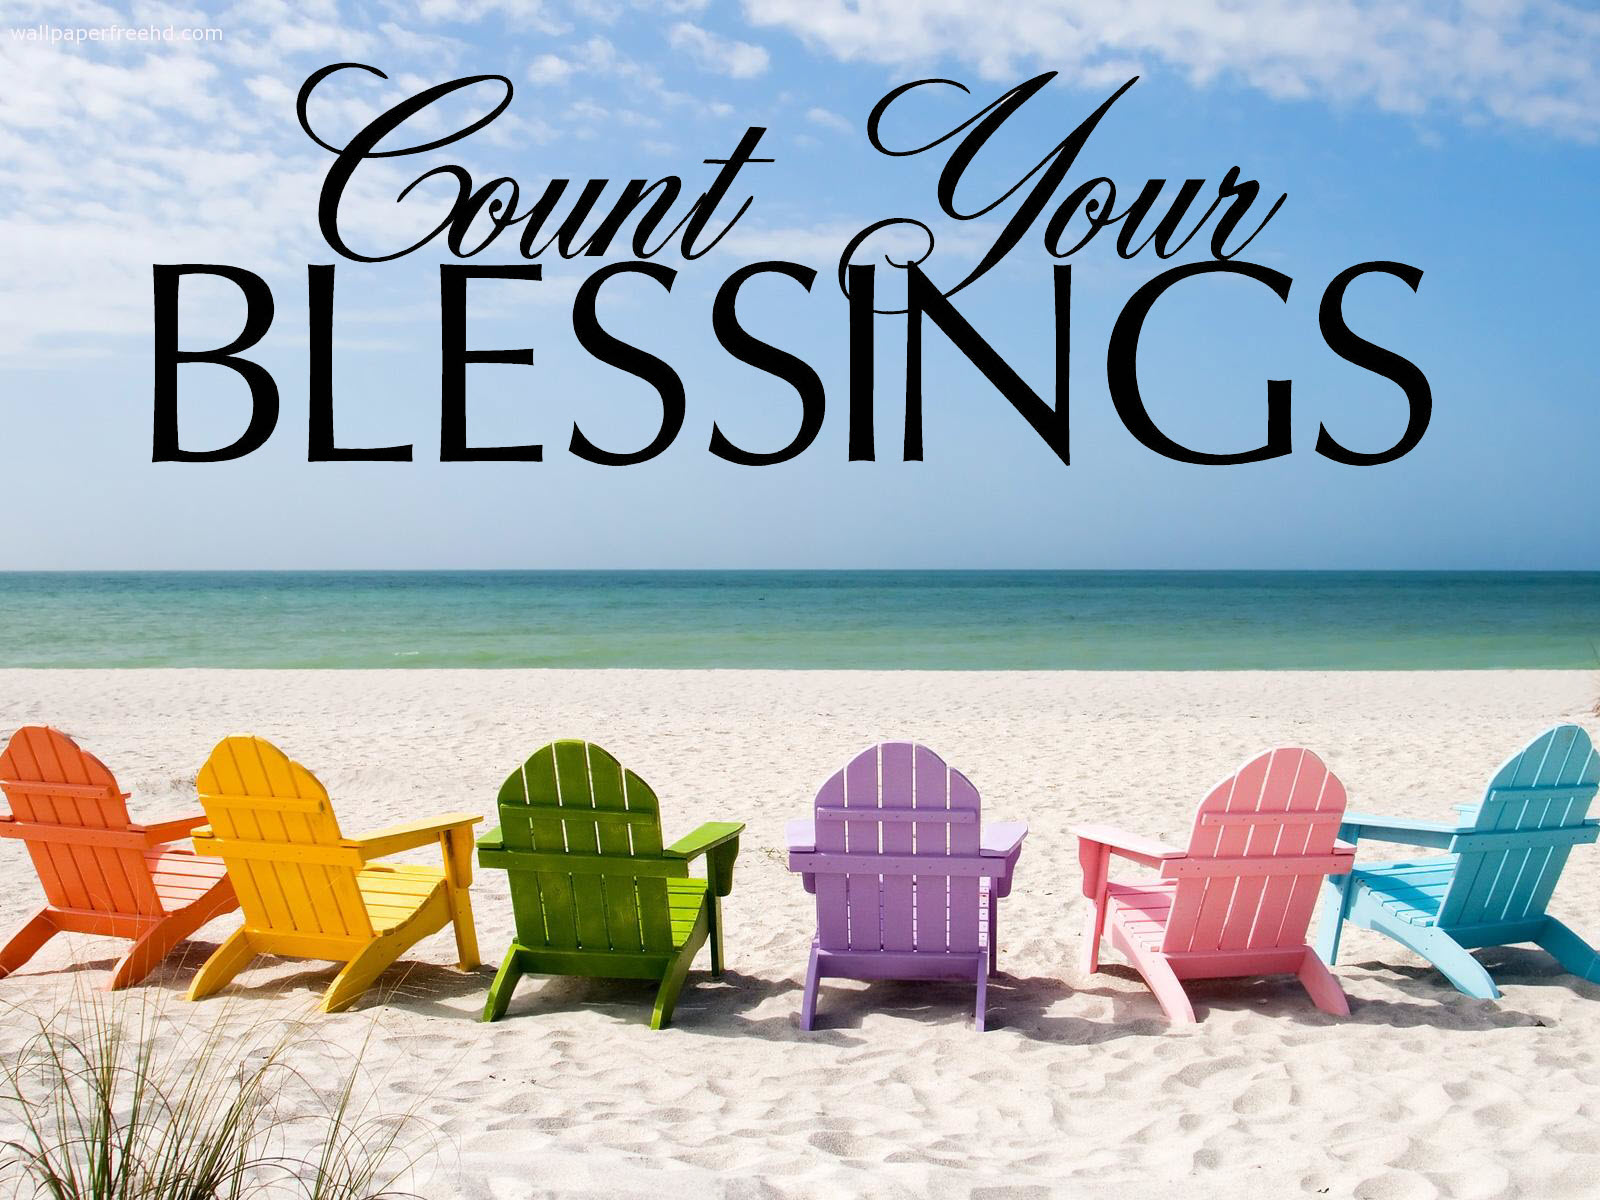 Count Your Blessings Beach View Picture